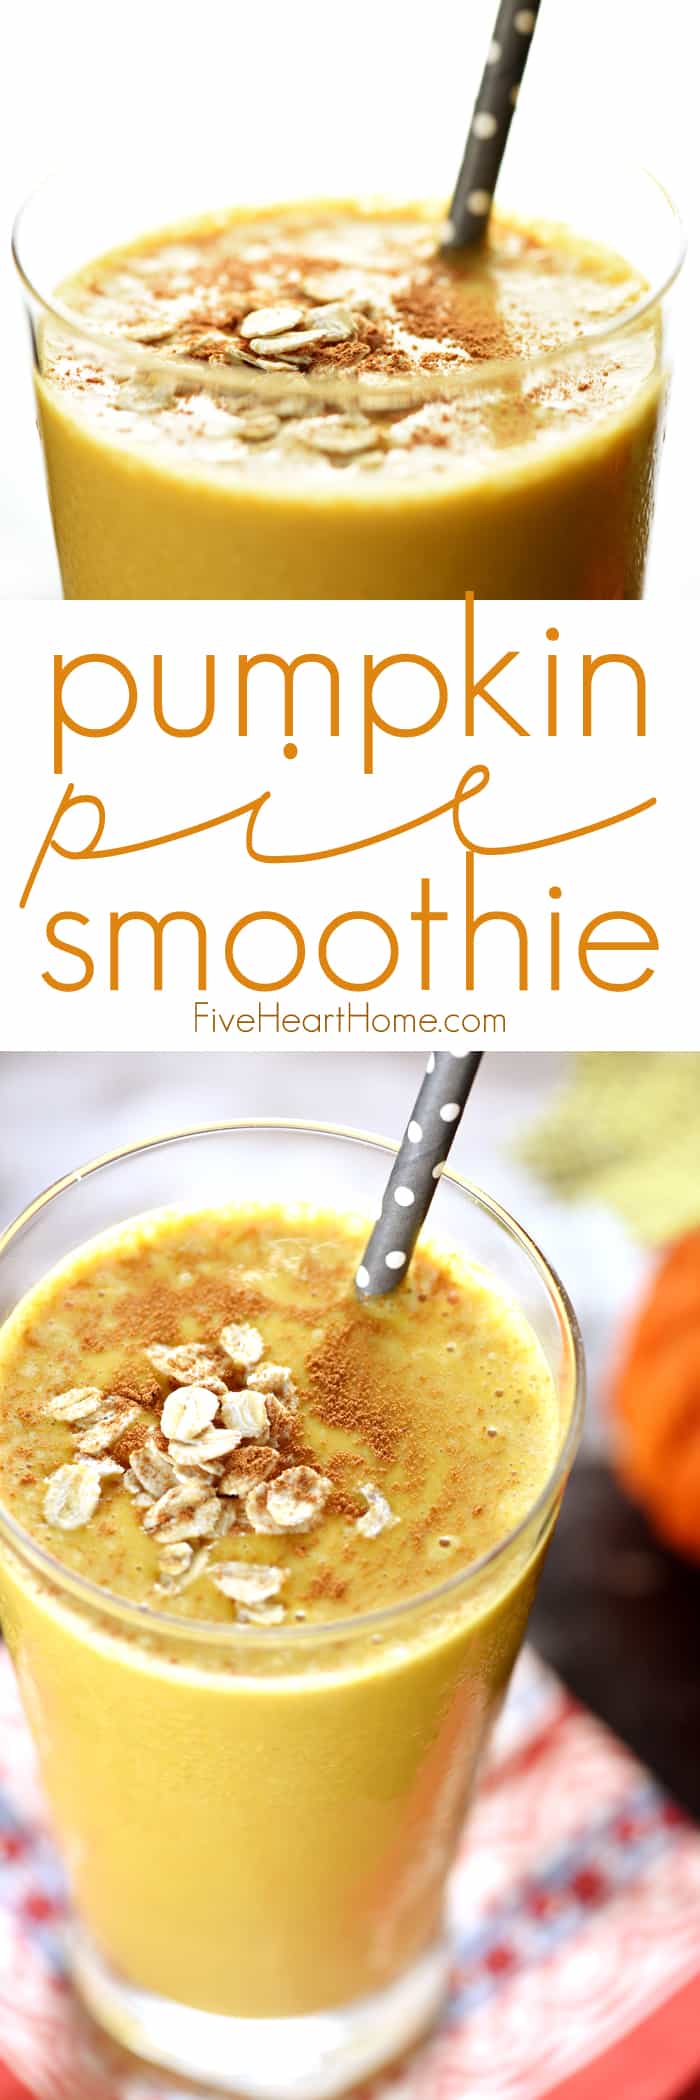 Pumpkin Pie Smoothie ~ a fall twist on thick, frosty, healthy oat smoothies...cinnamon-spiced, honey-sweetened, and perfect for breakfast or as a snack! | FiveHeartHome.com via @fivehearthome